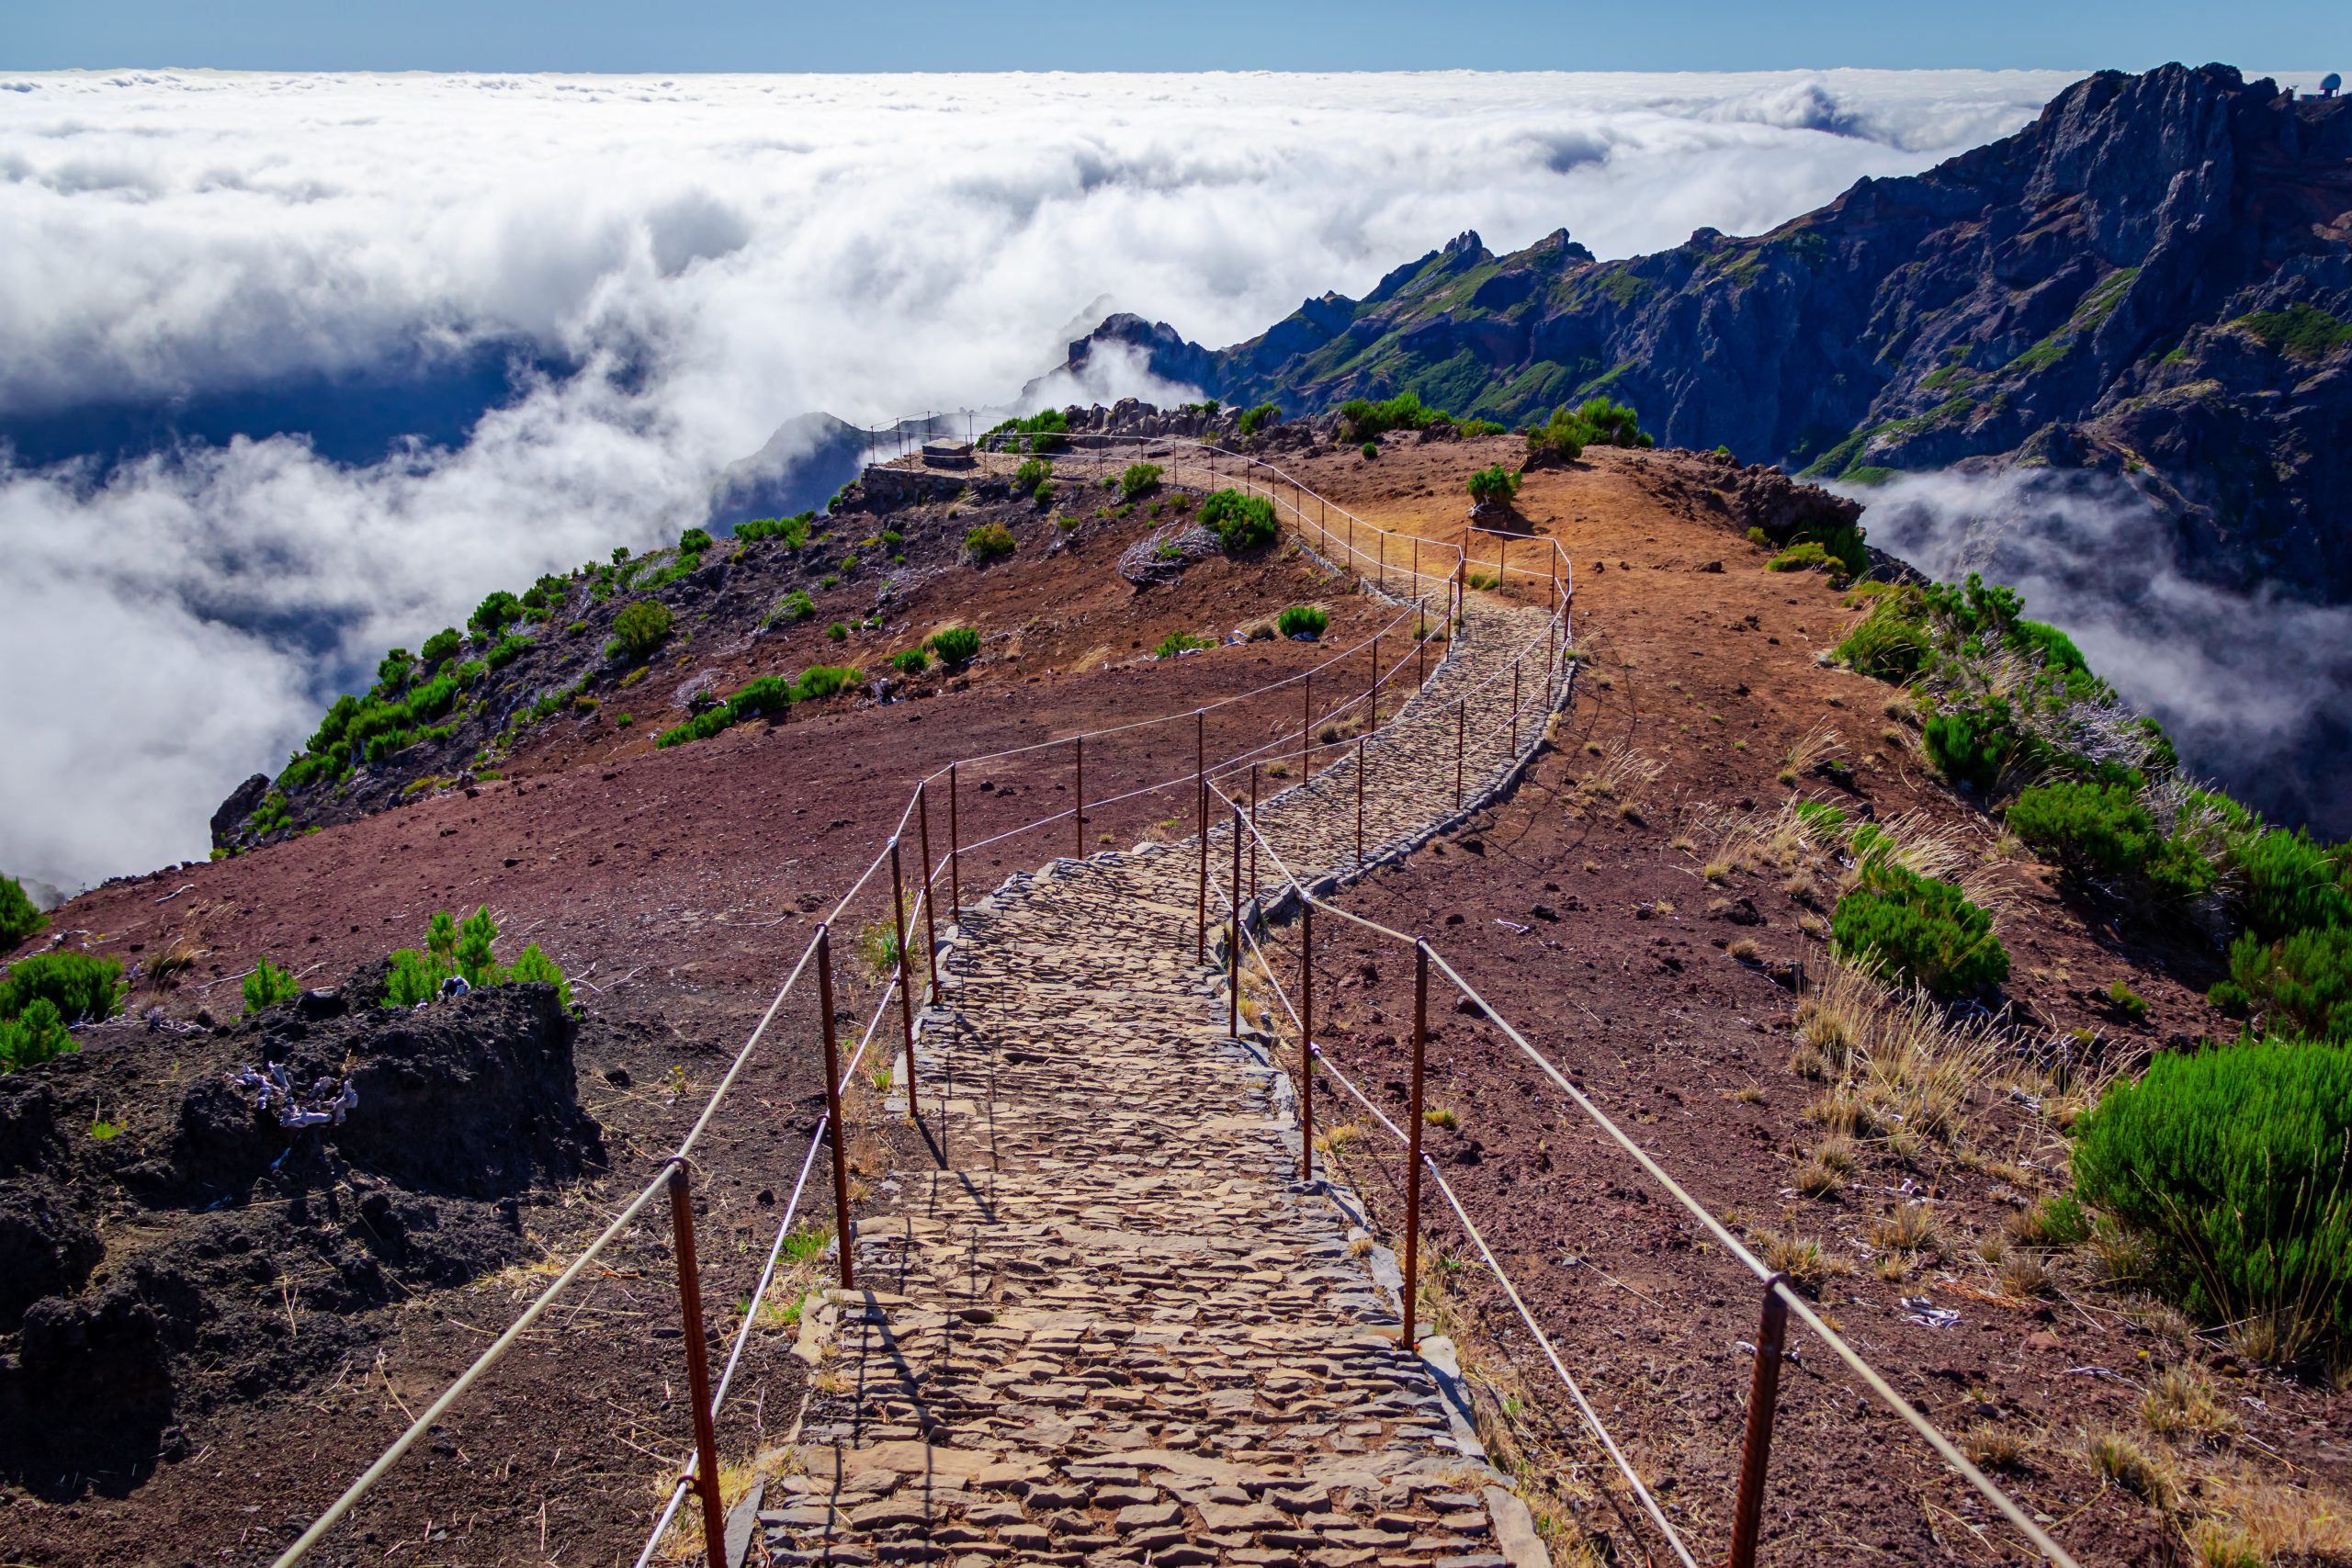 10 best places to visit in madeira